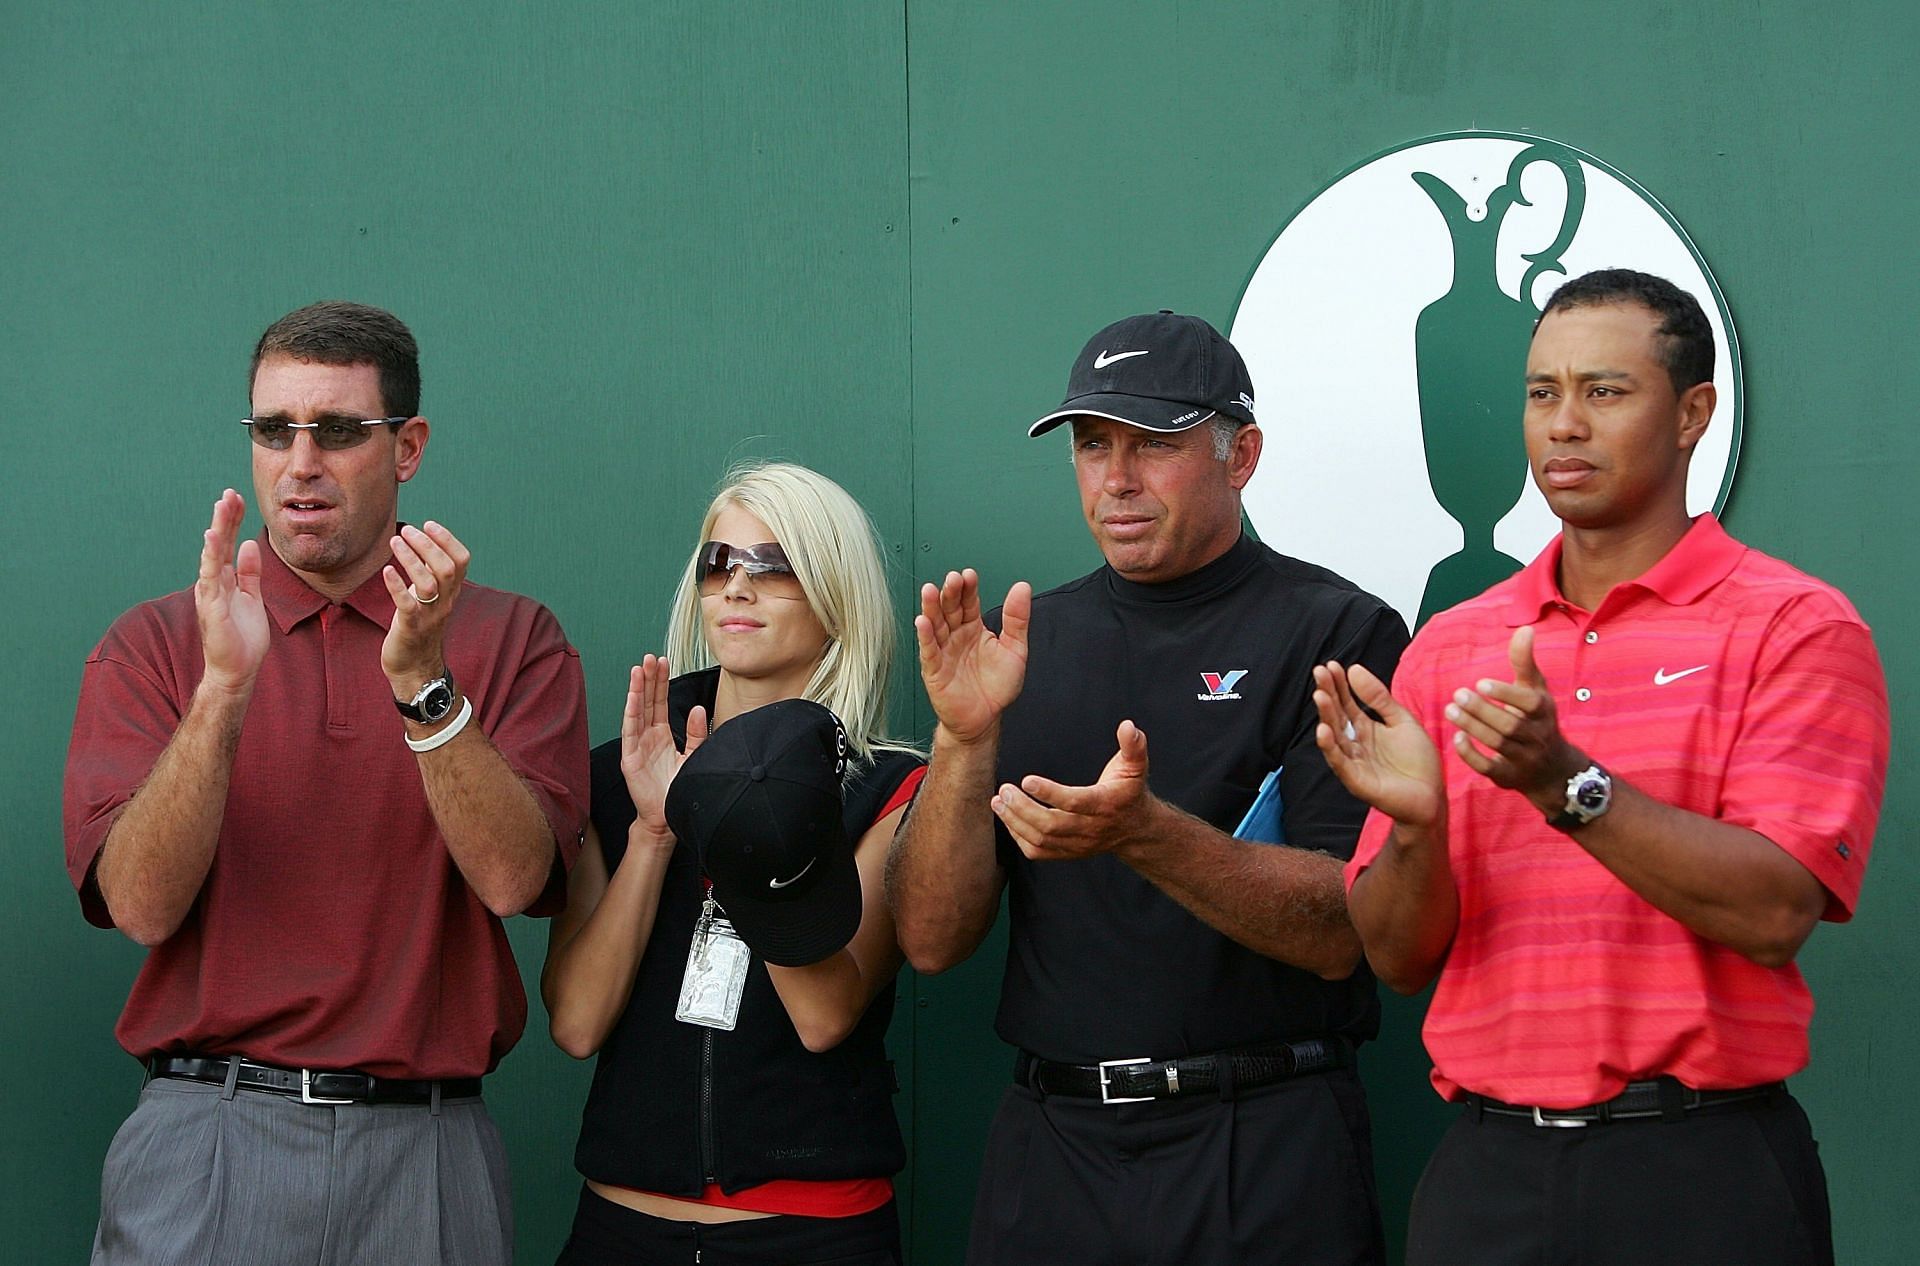 Tiger Woods, Elin Nordegren, and Steve Williams at the 135th Open Championship - Final Round 2006 (Image via Ross Kinnaird/Getty Images)